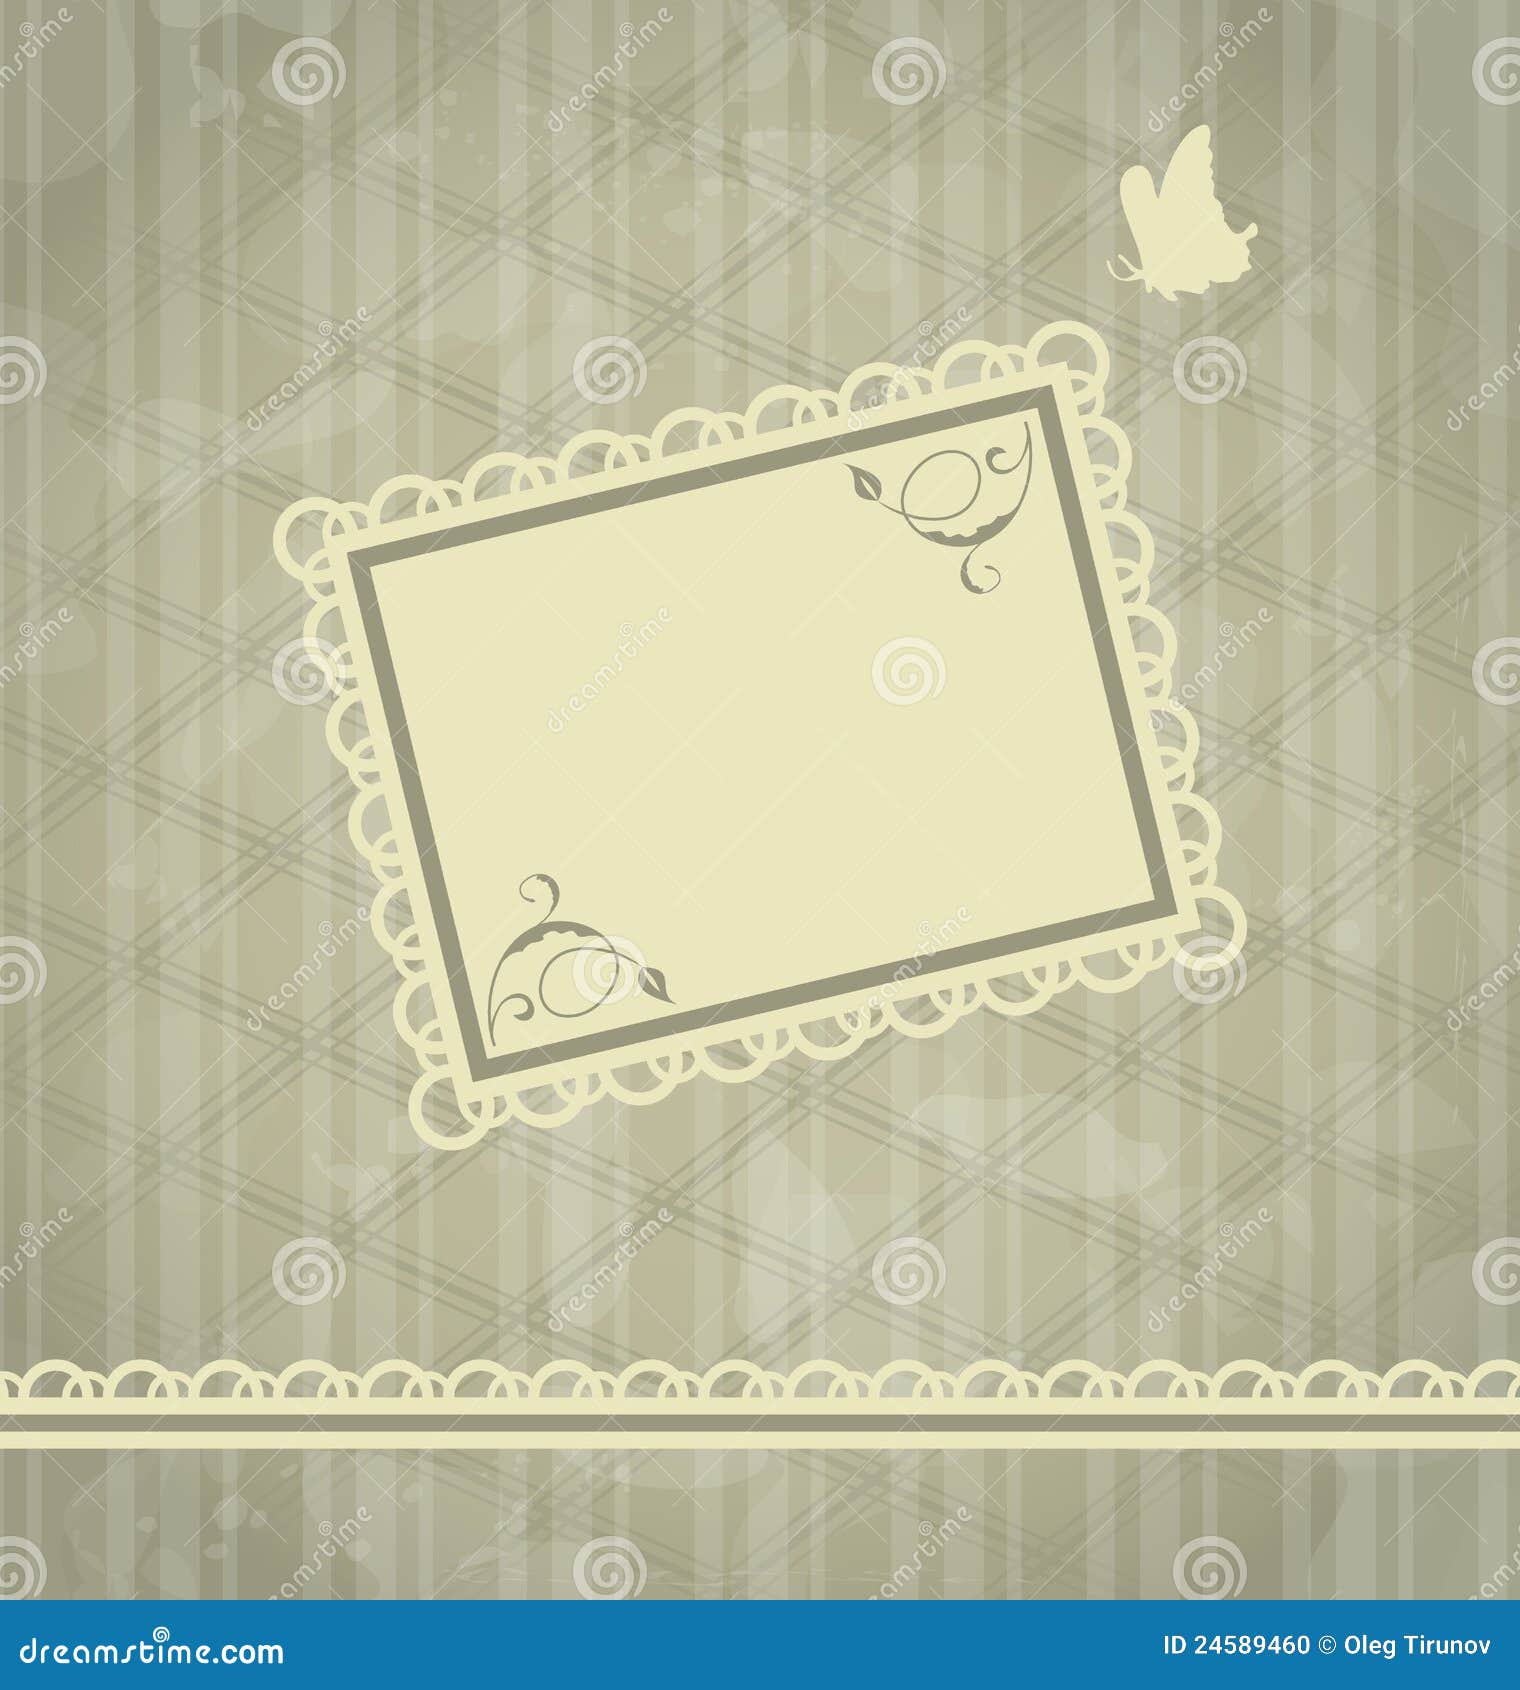 grunge oldfashioned background with greeting card